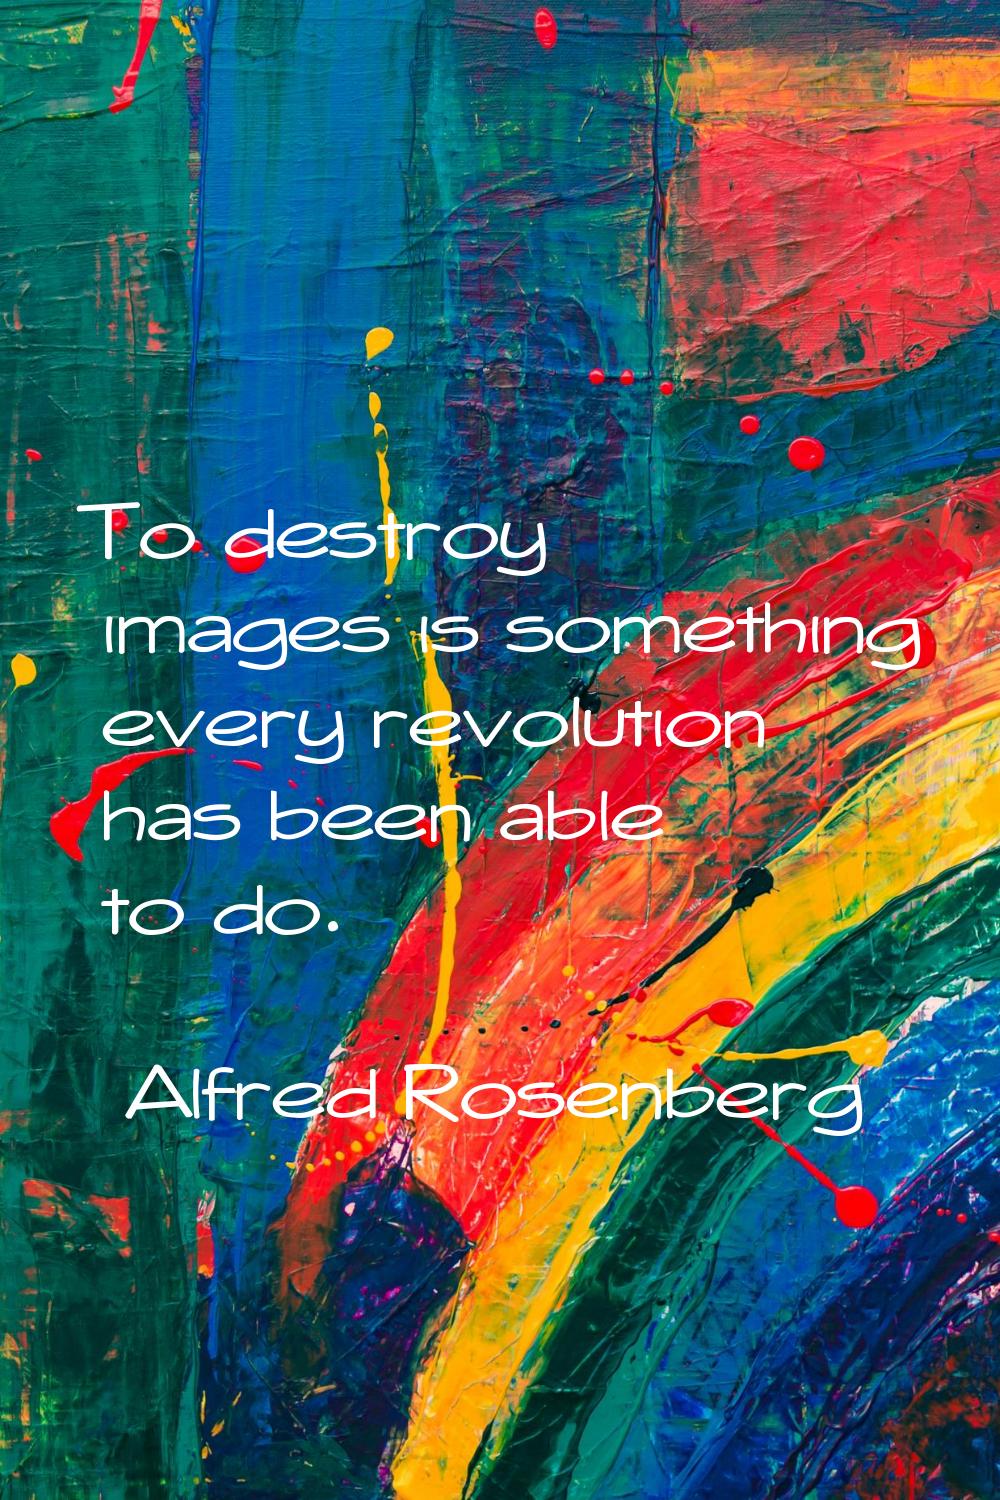 To destroy images is something every revolution has been able to do.